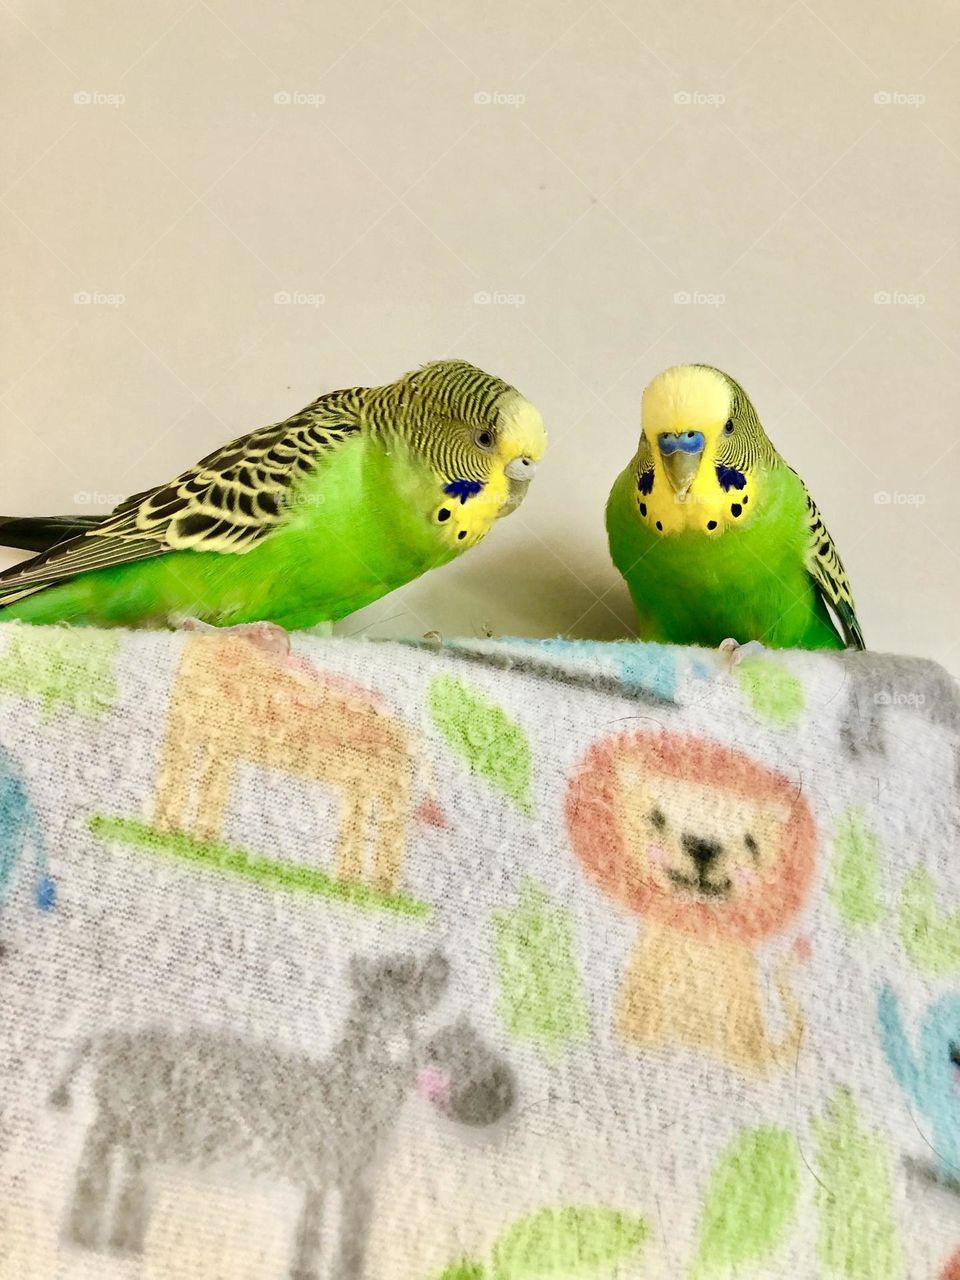 Relaxing together Kiwi & Coco / my parquets 🌿🦜🌿🦜 